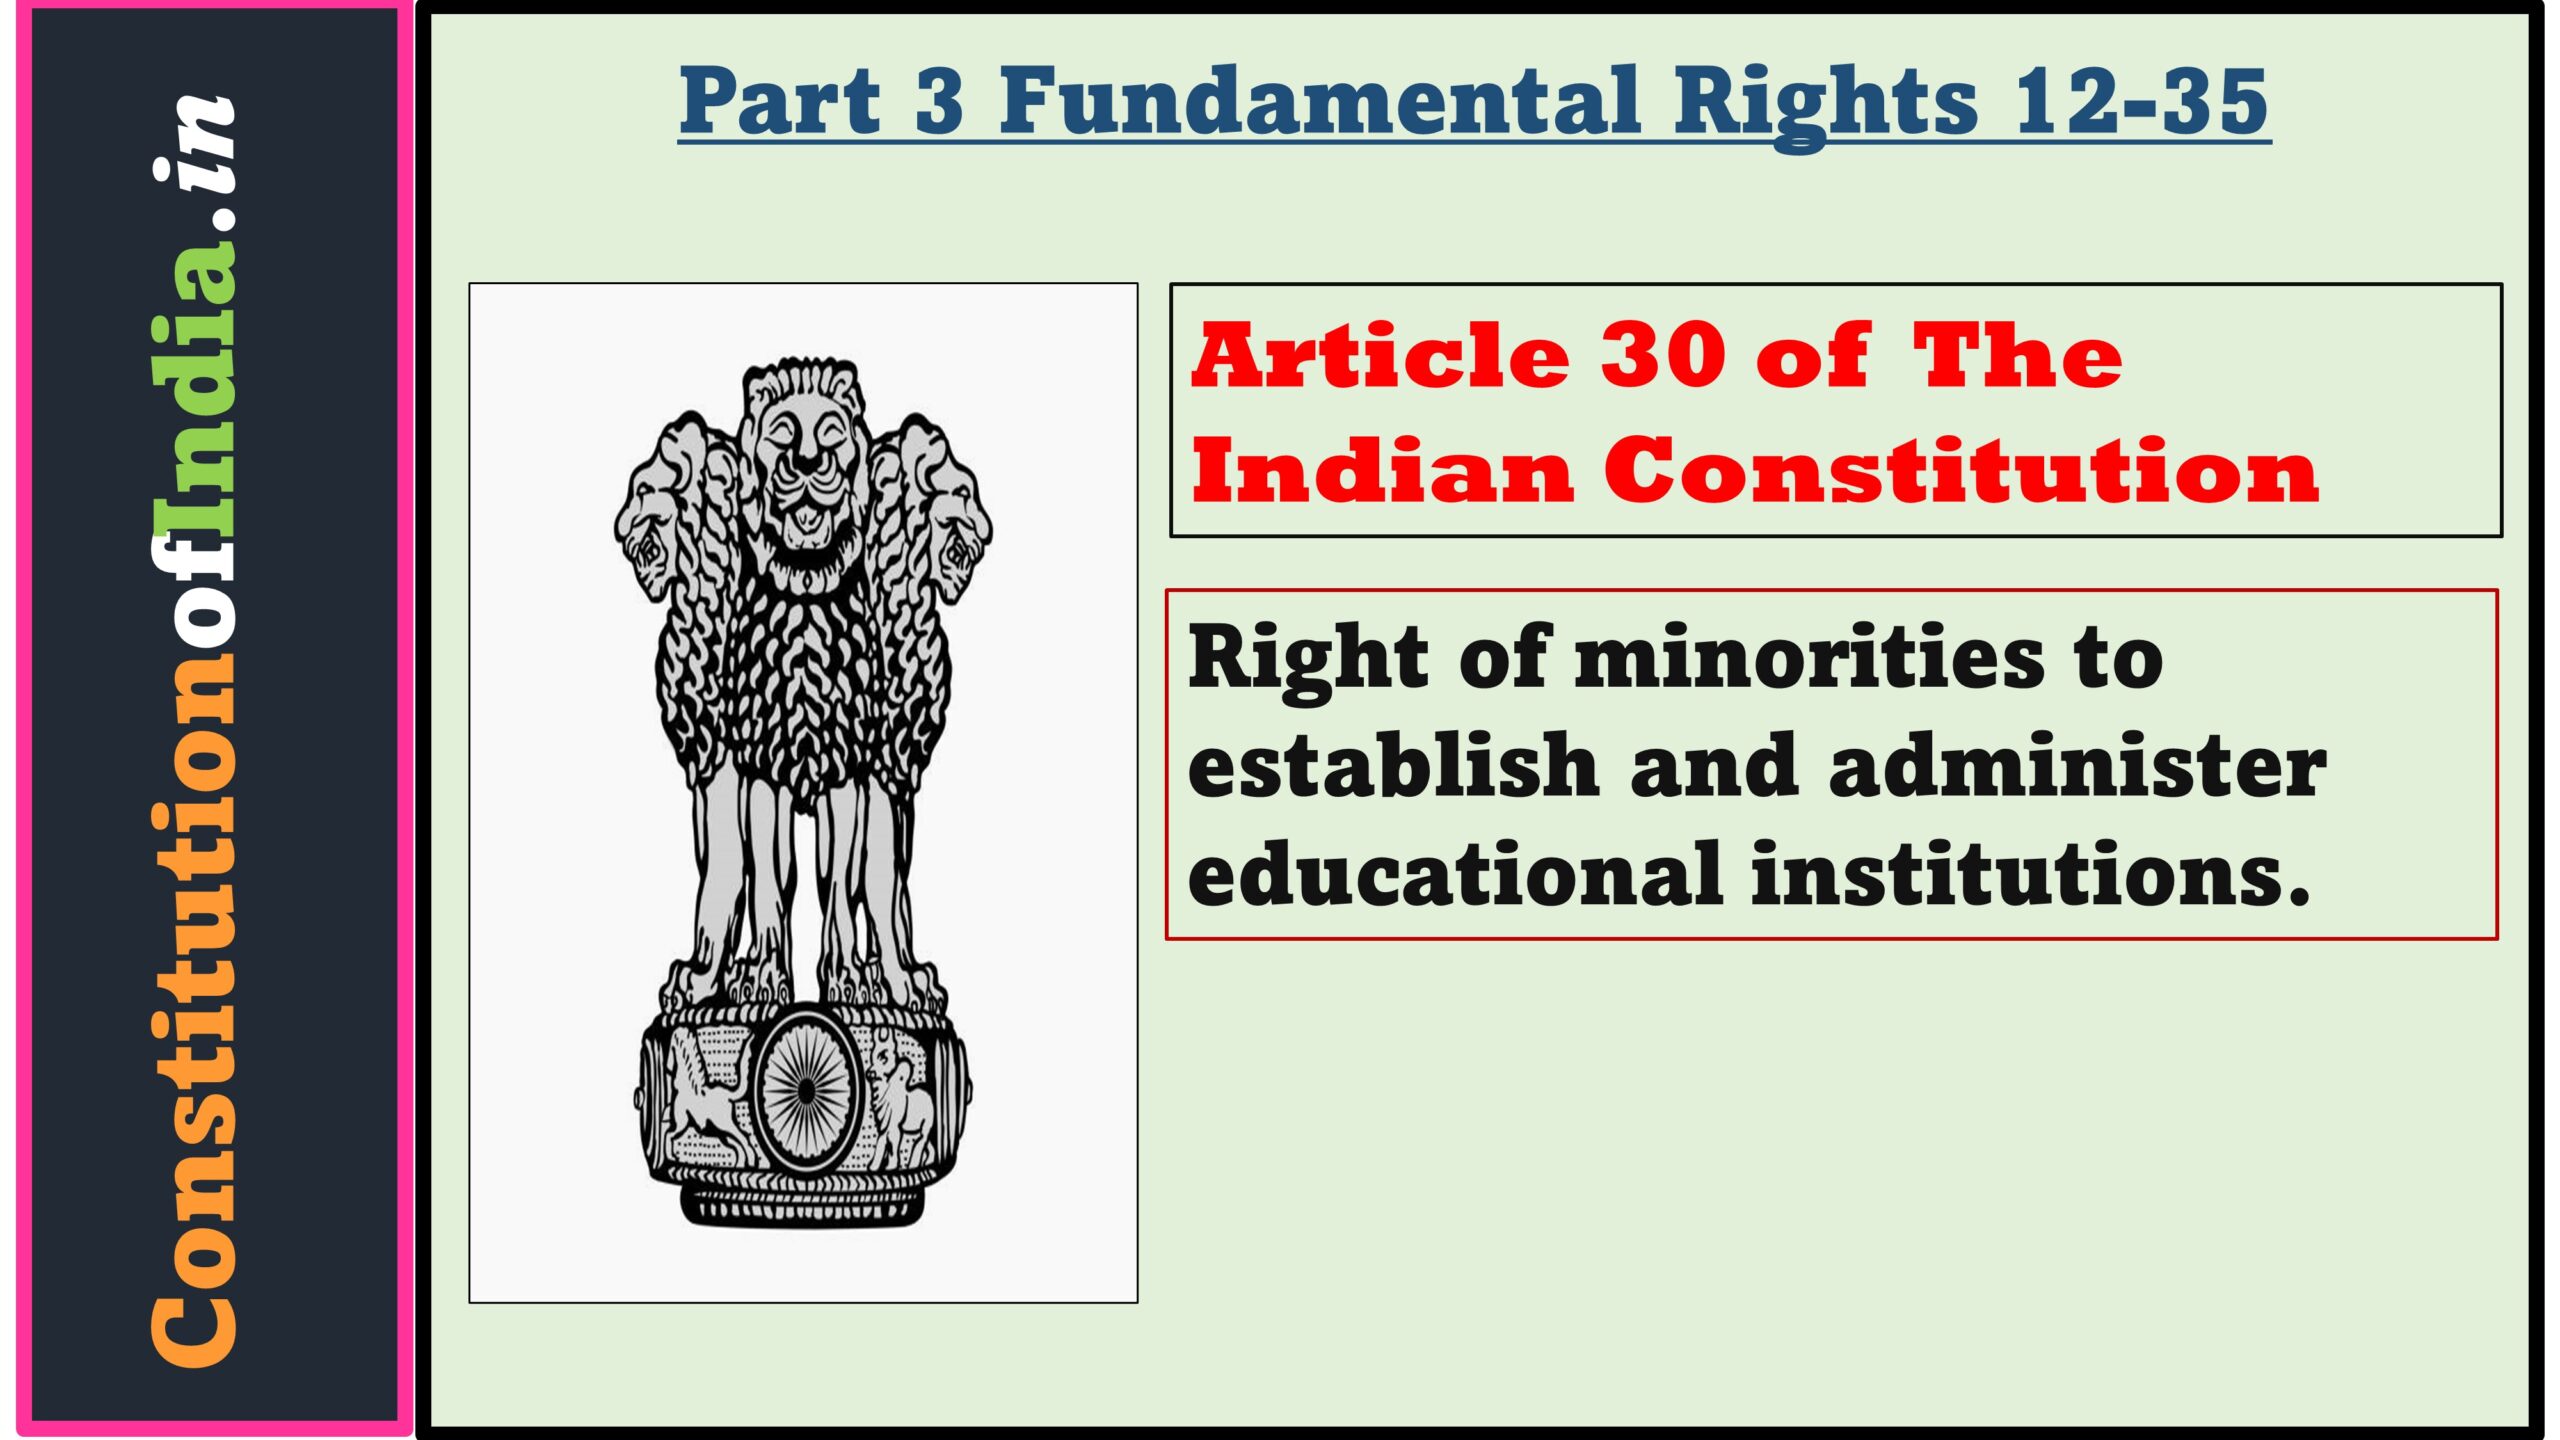 Article 30 of Indian Constitution: Right of minorities to establish and administer educational institutions.